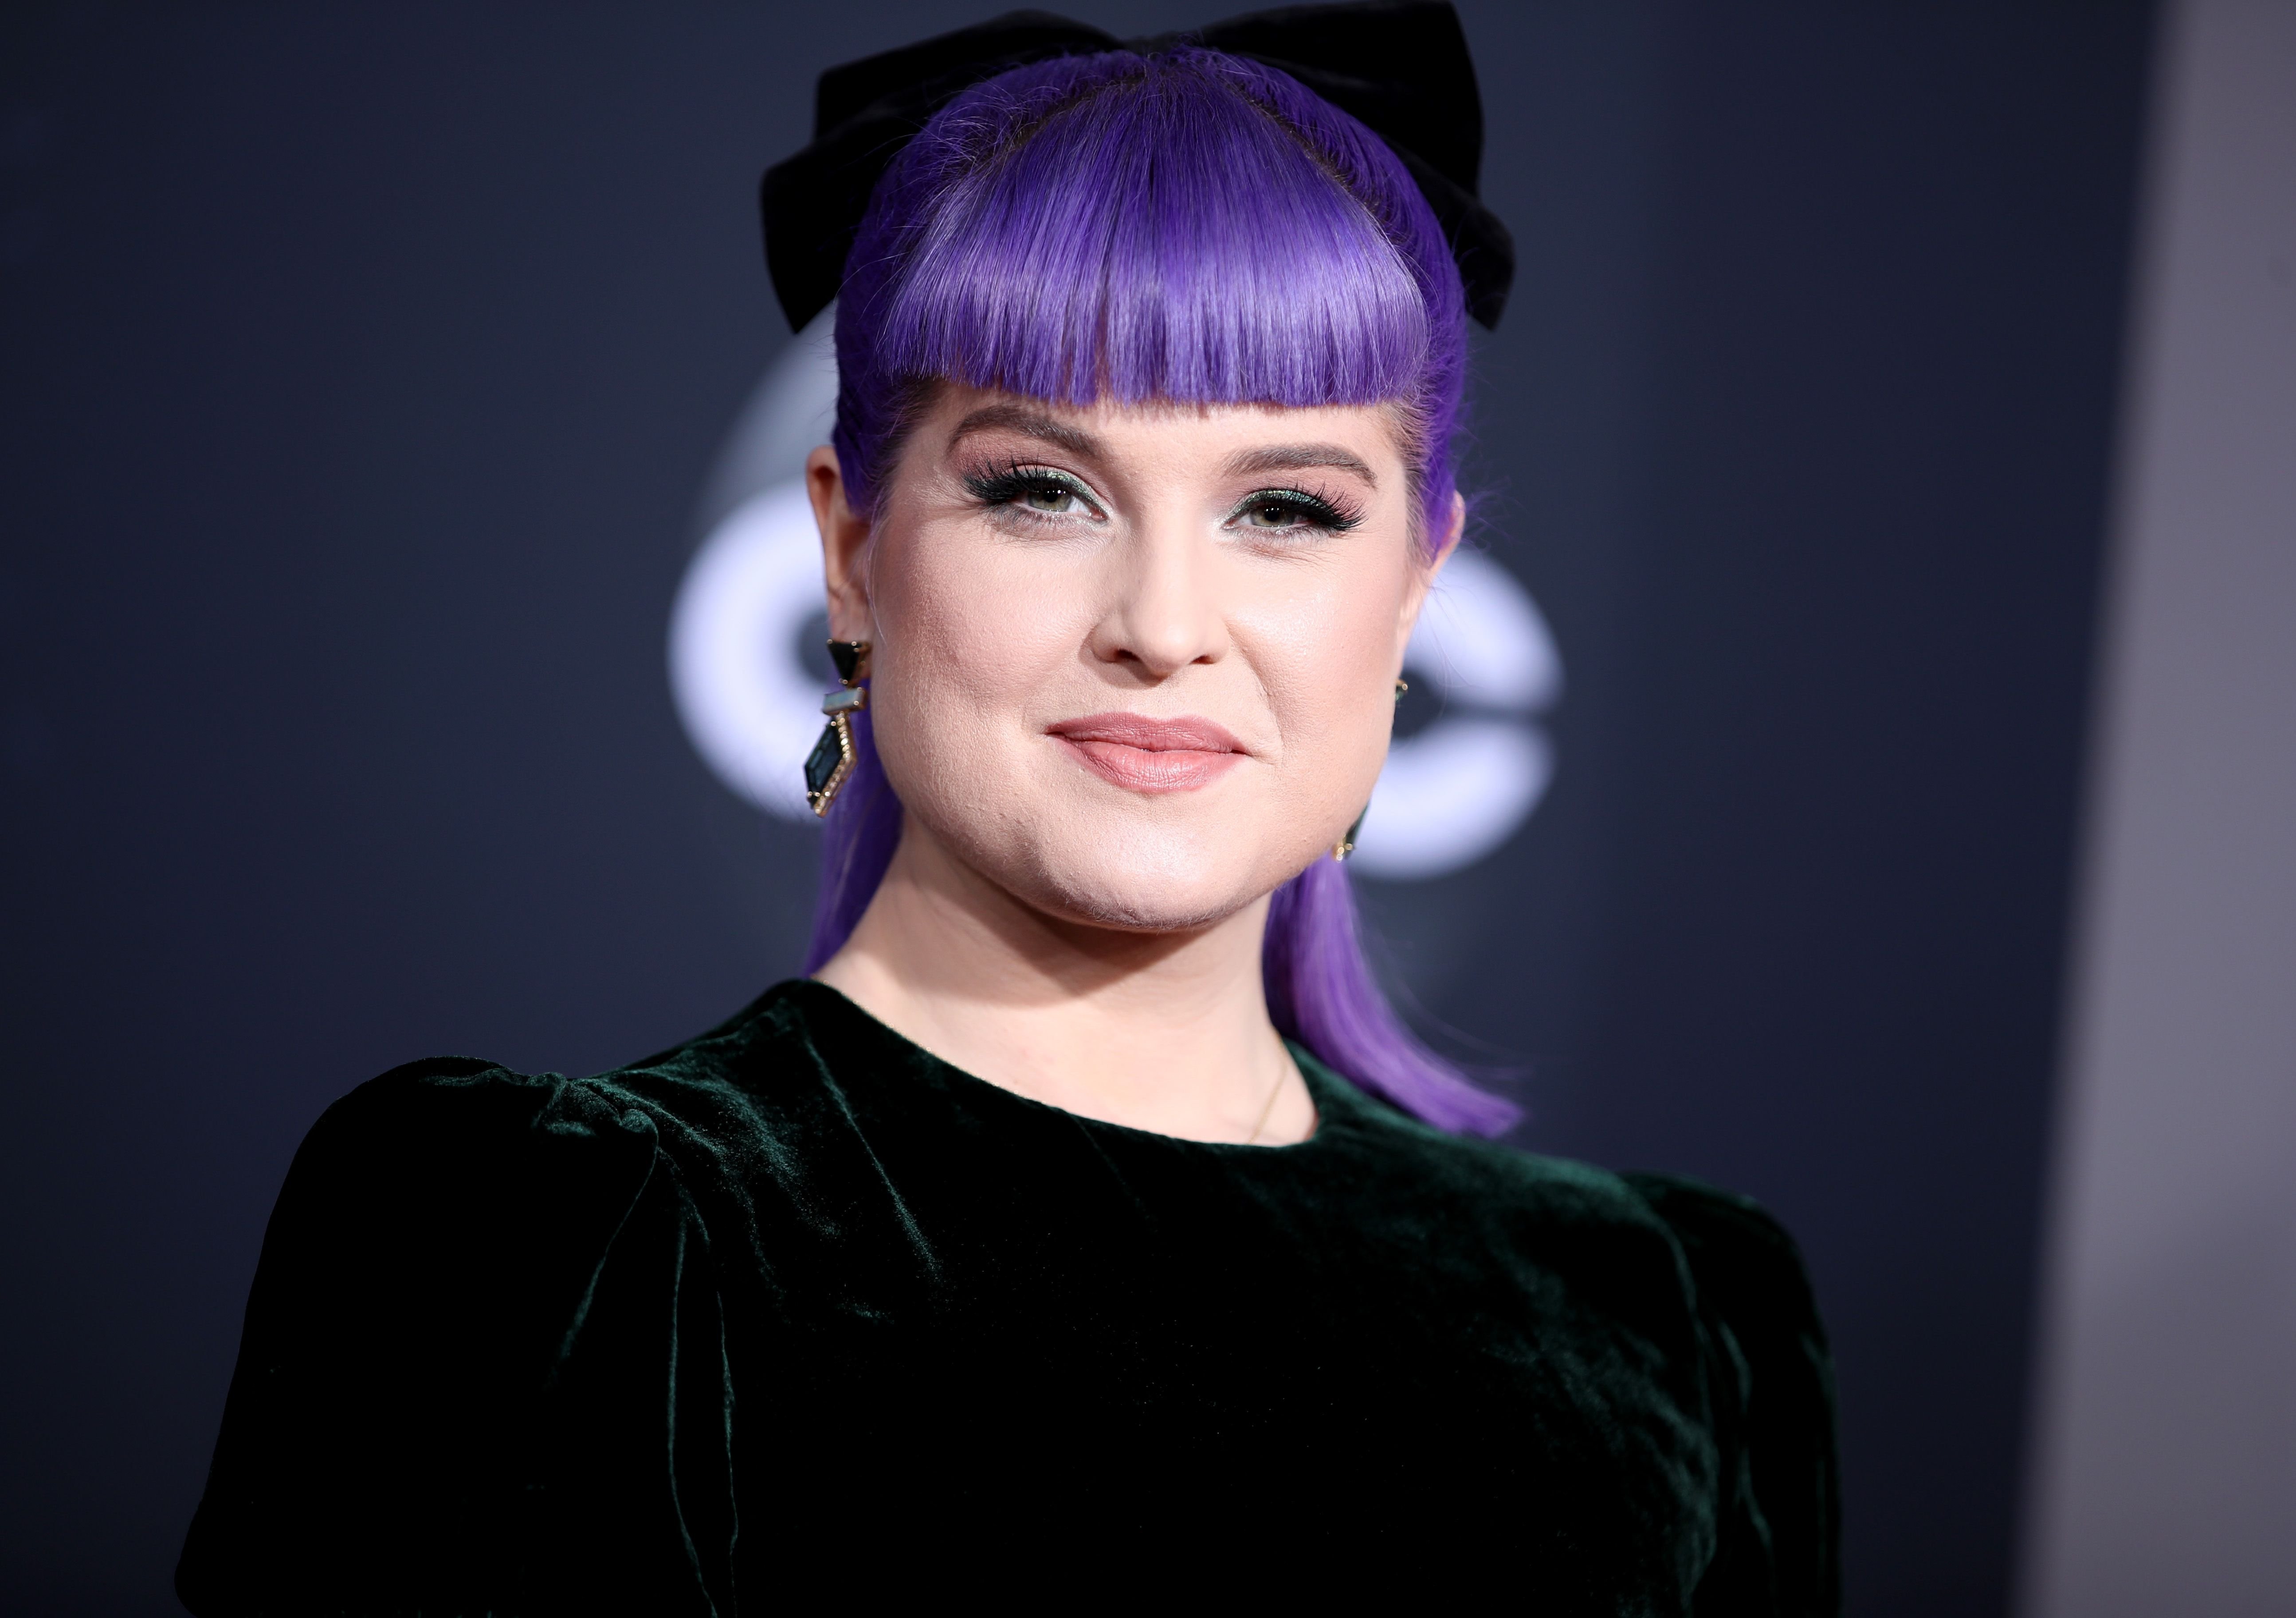 Kelly Osbourne at the 2019 American Music Awards at Microsoft Theater on November 24, 2019 in Los Angeles, California | Photo: Getty Images